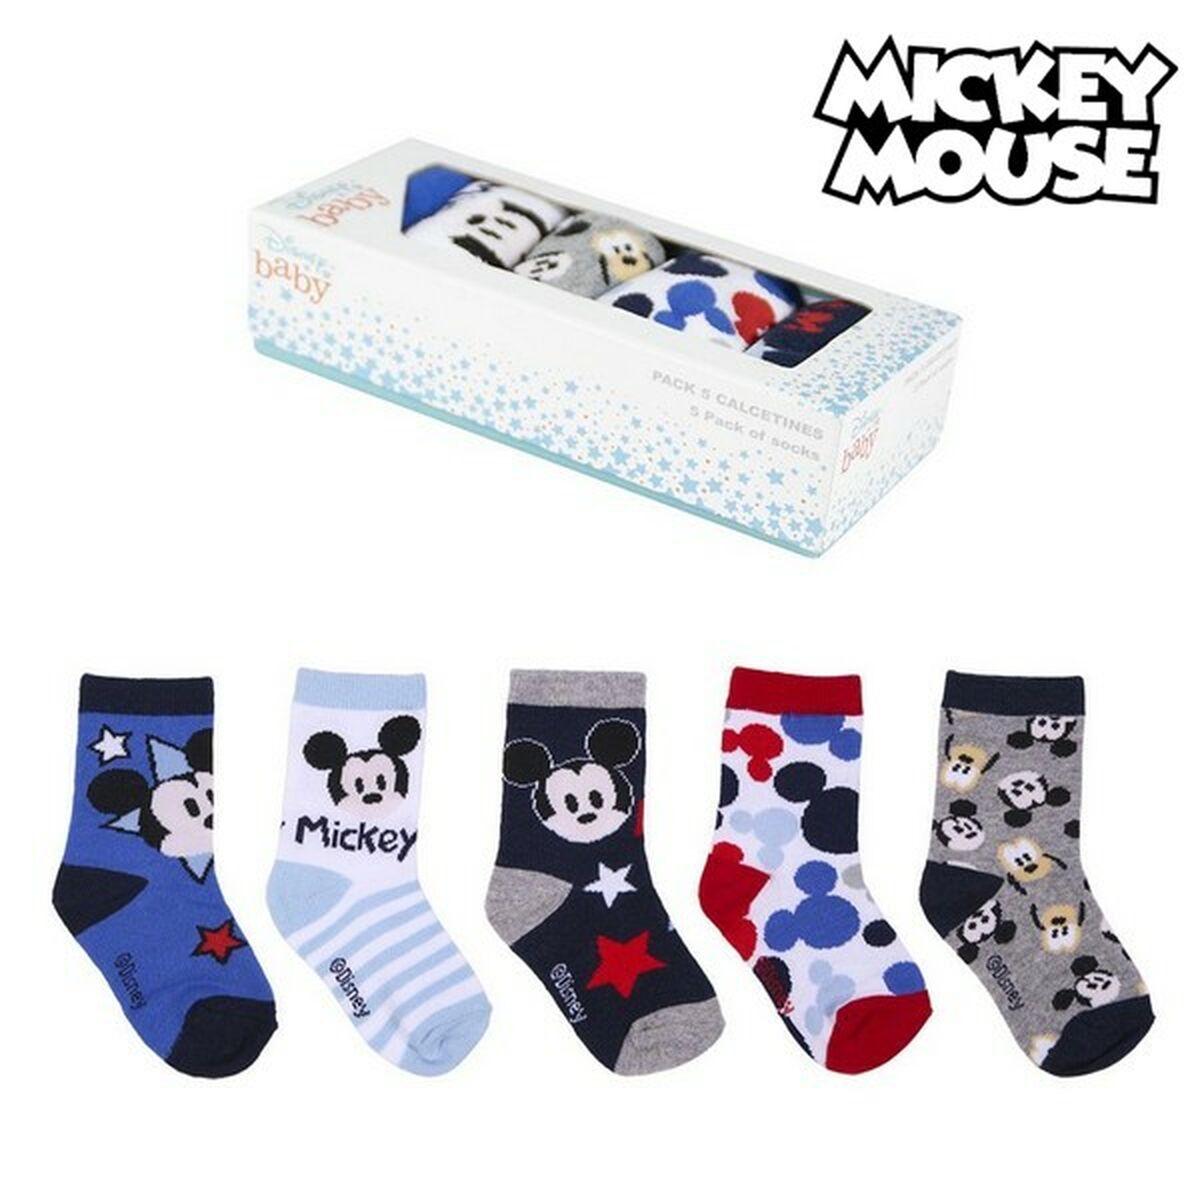 Chaussettes Mickey Mouse (5 paires) Multicouleur